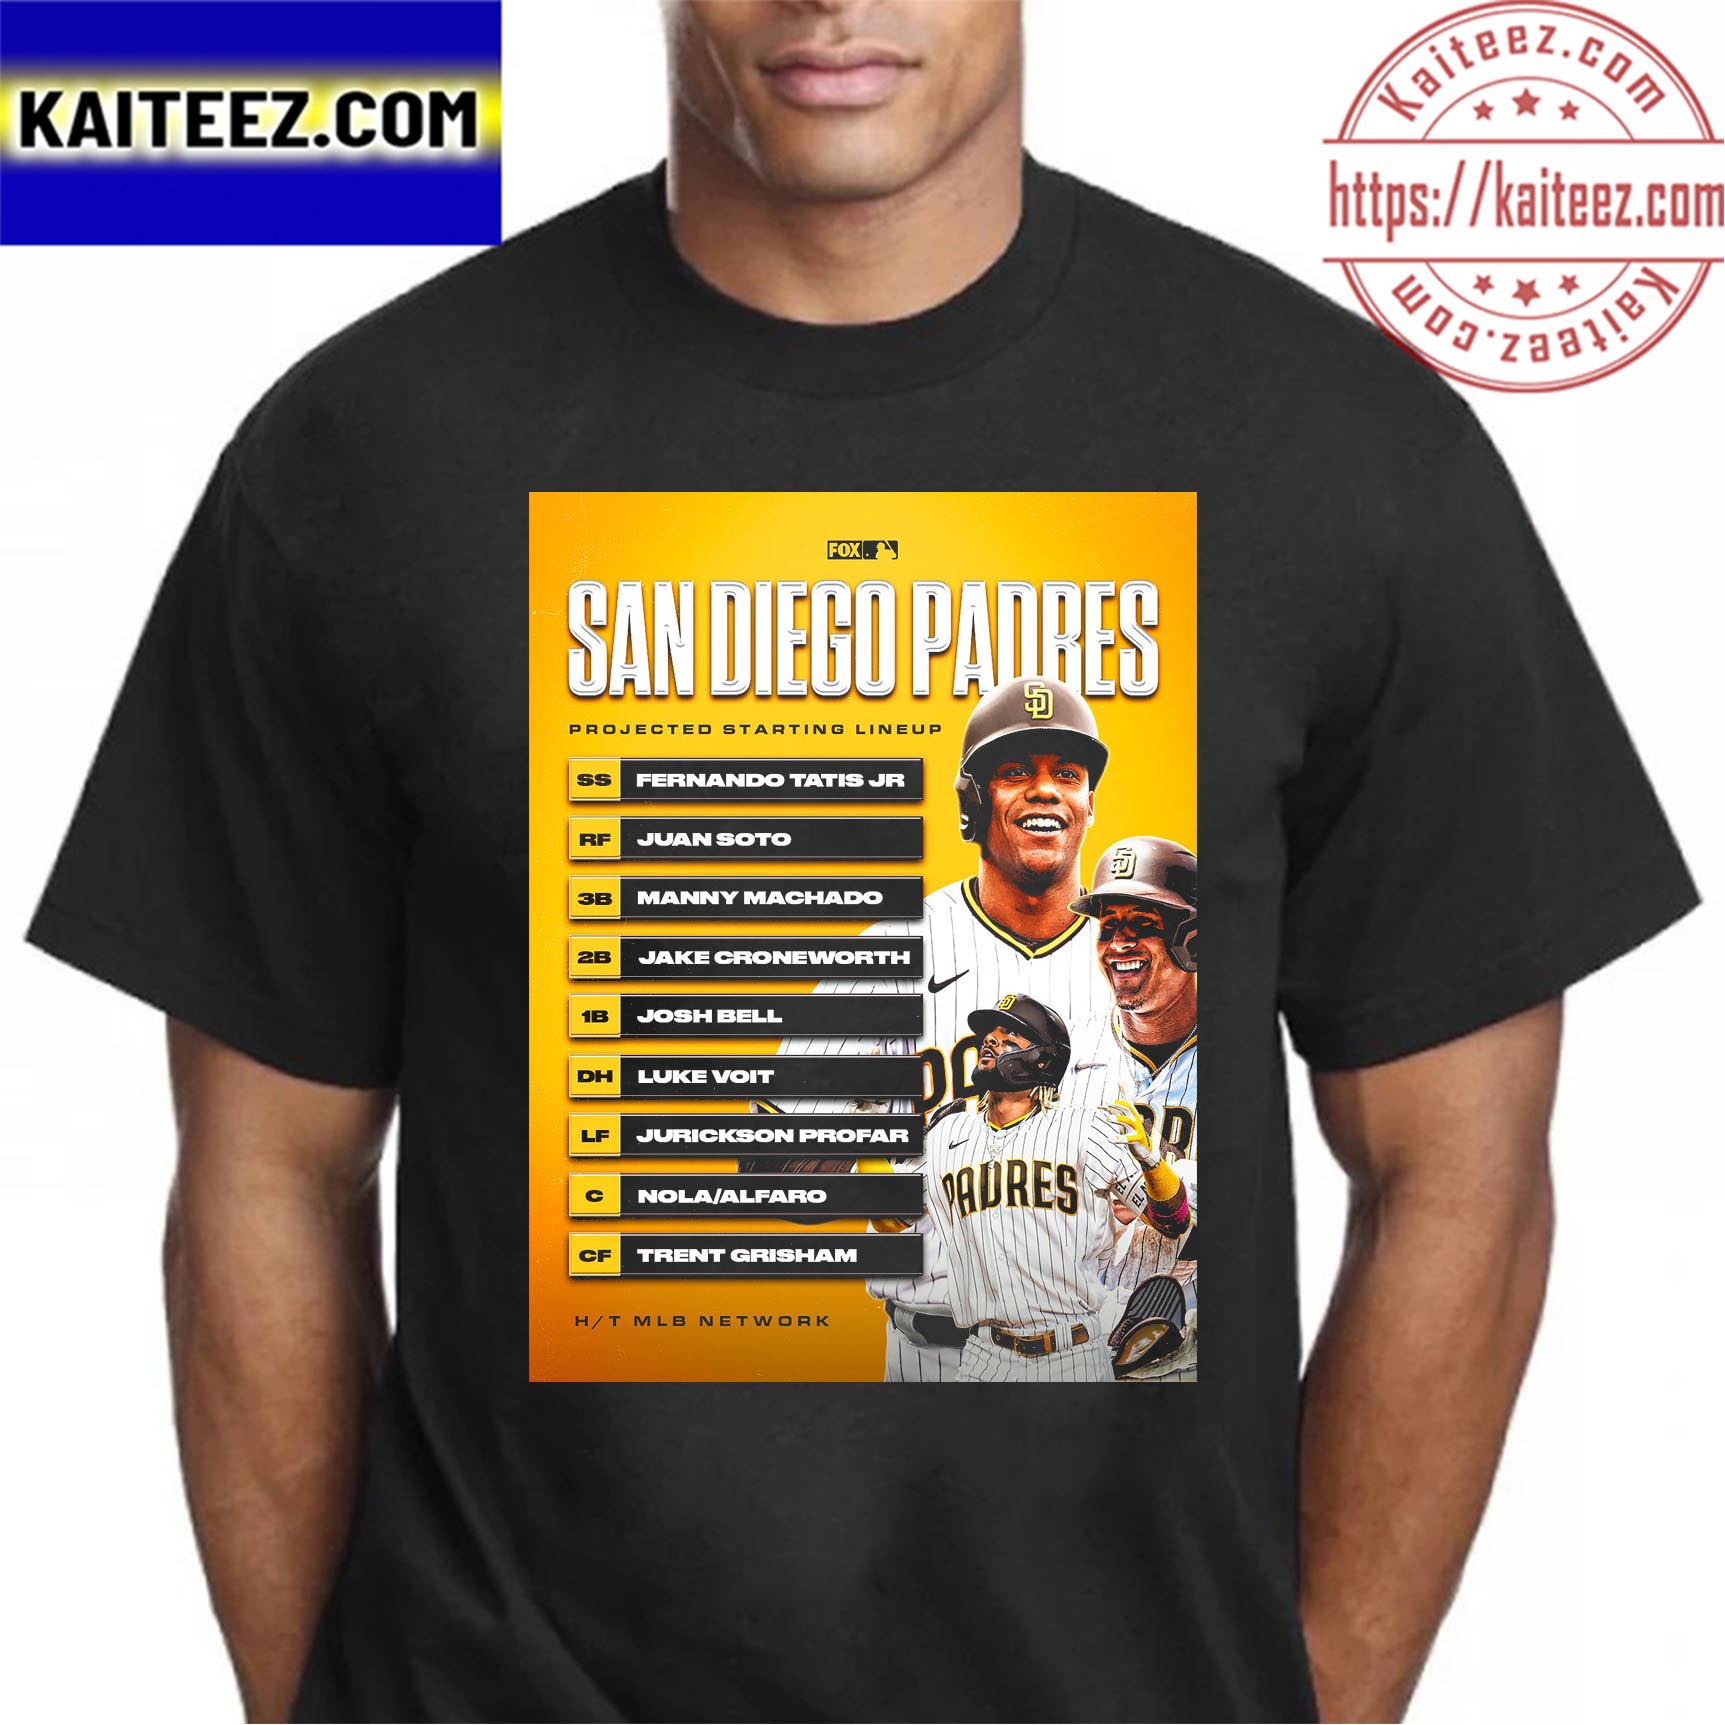 San Diego Padres Projected Starting Lineup T-shirt - Kaiteez